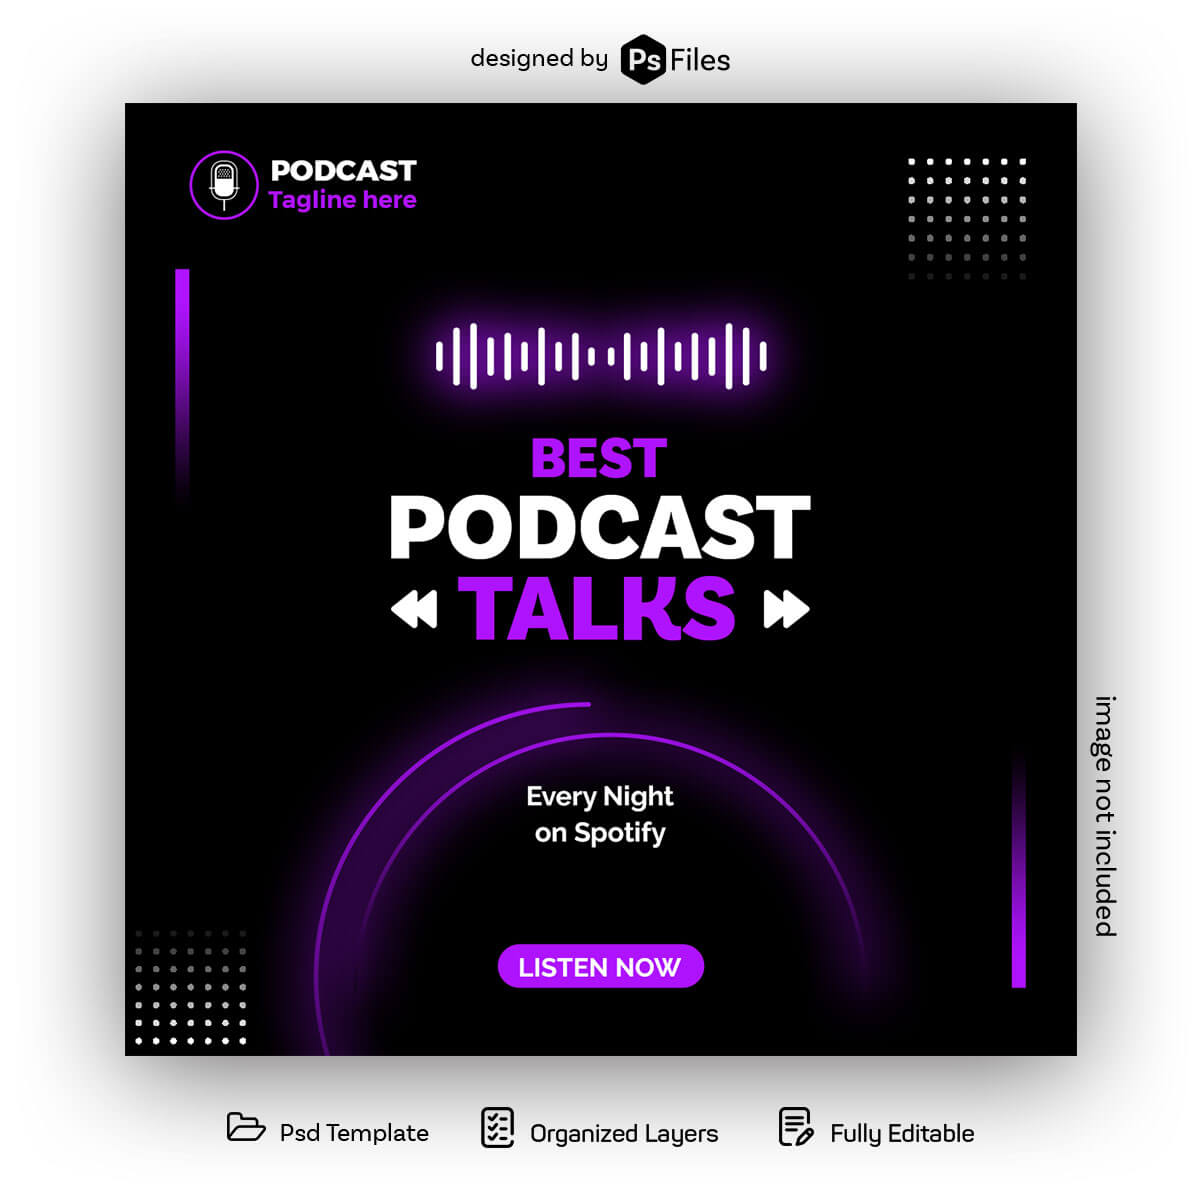 Free and customizable podcast templates